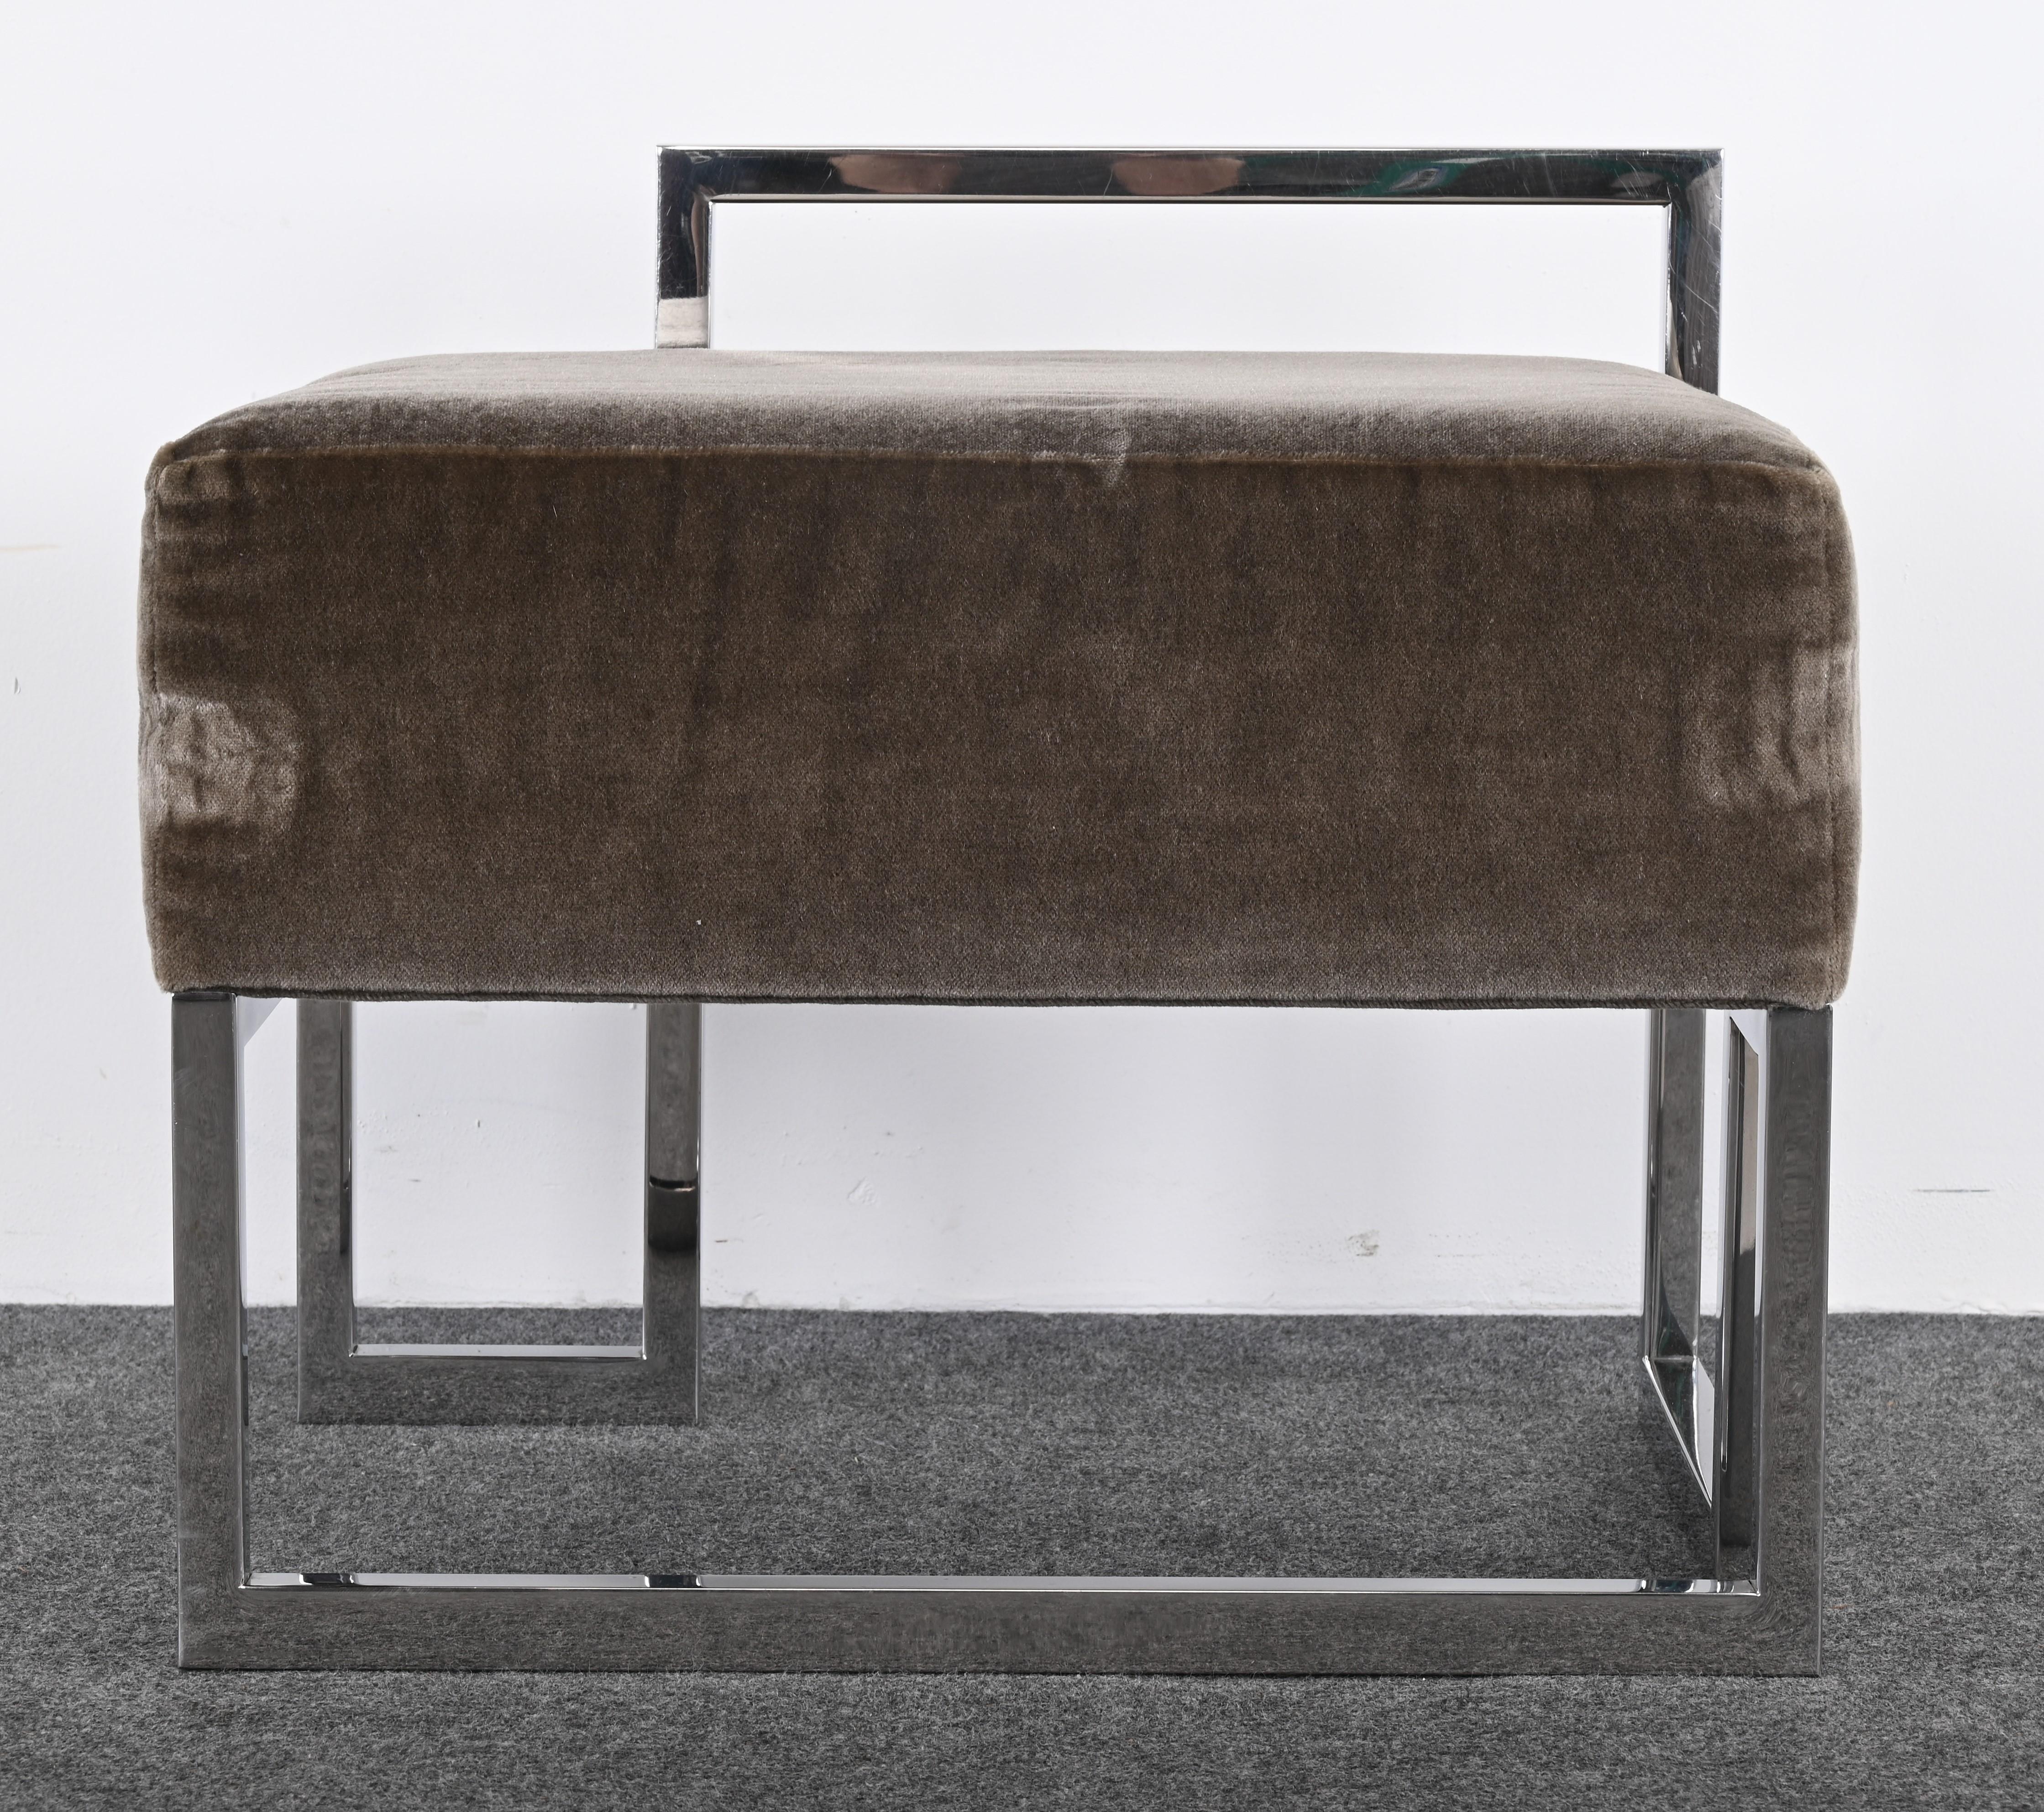 A stunning modernist stainless steel bench designed by Vladimir Kagan for Gucci, 1990s. This versatile bench would work in any interior, whether a bedroom or living room. The bench is part of a collection from the original showroom designed by Bill